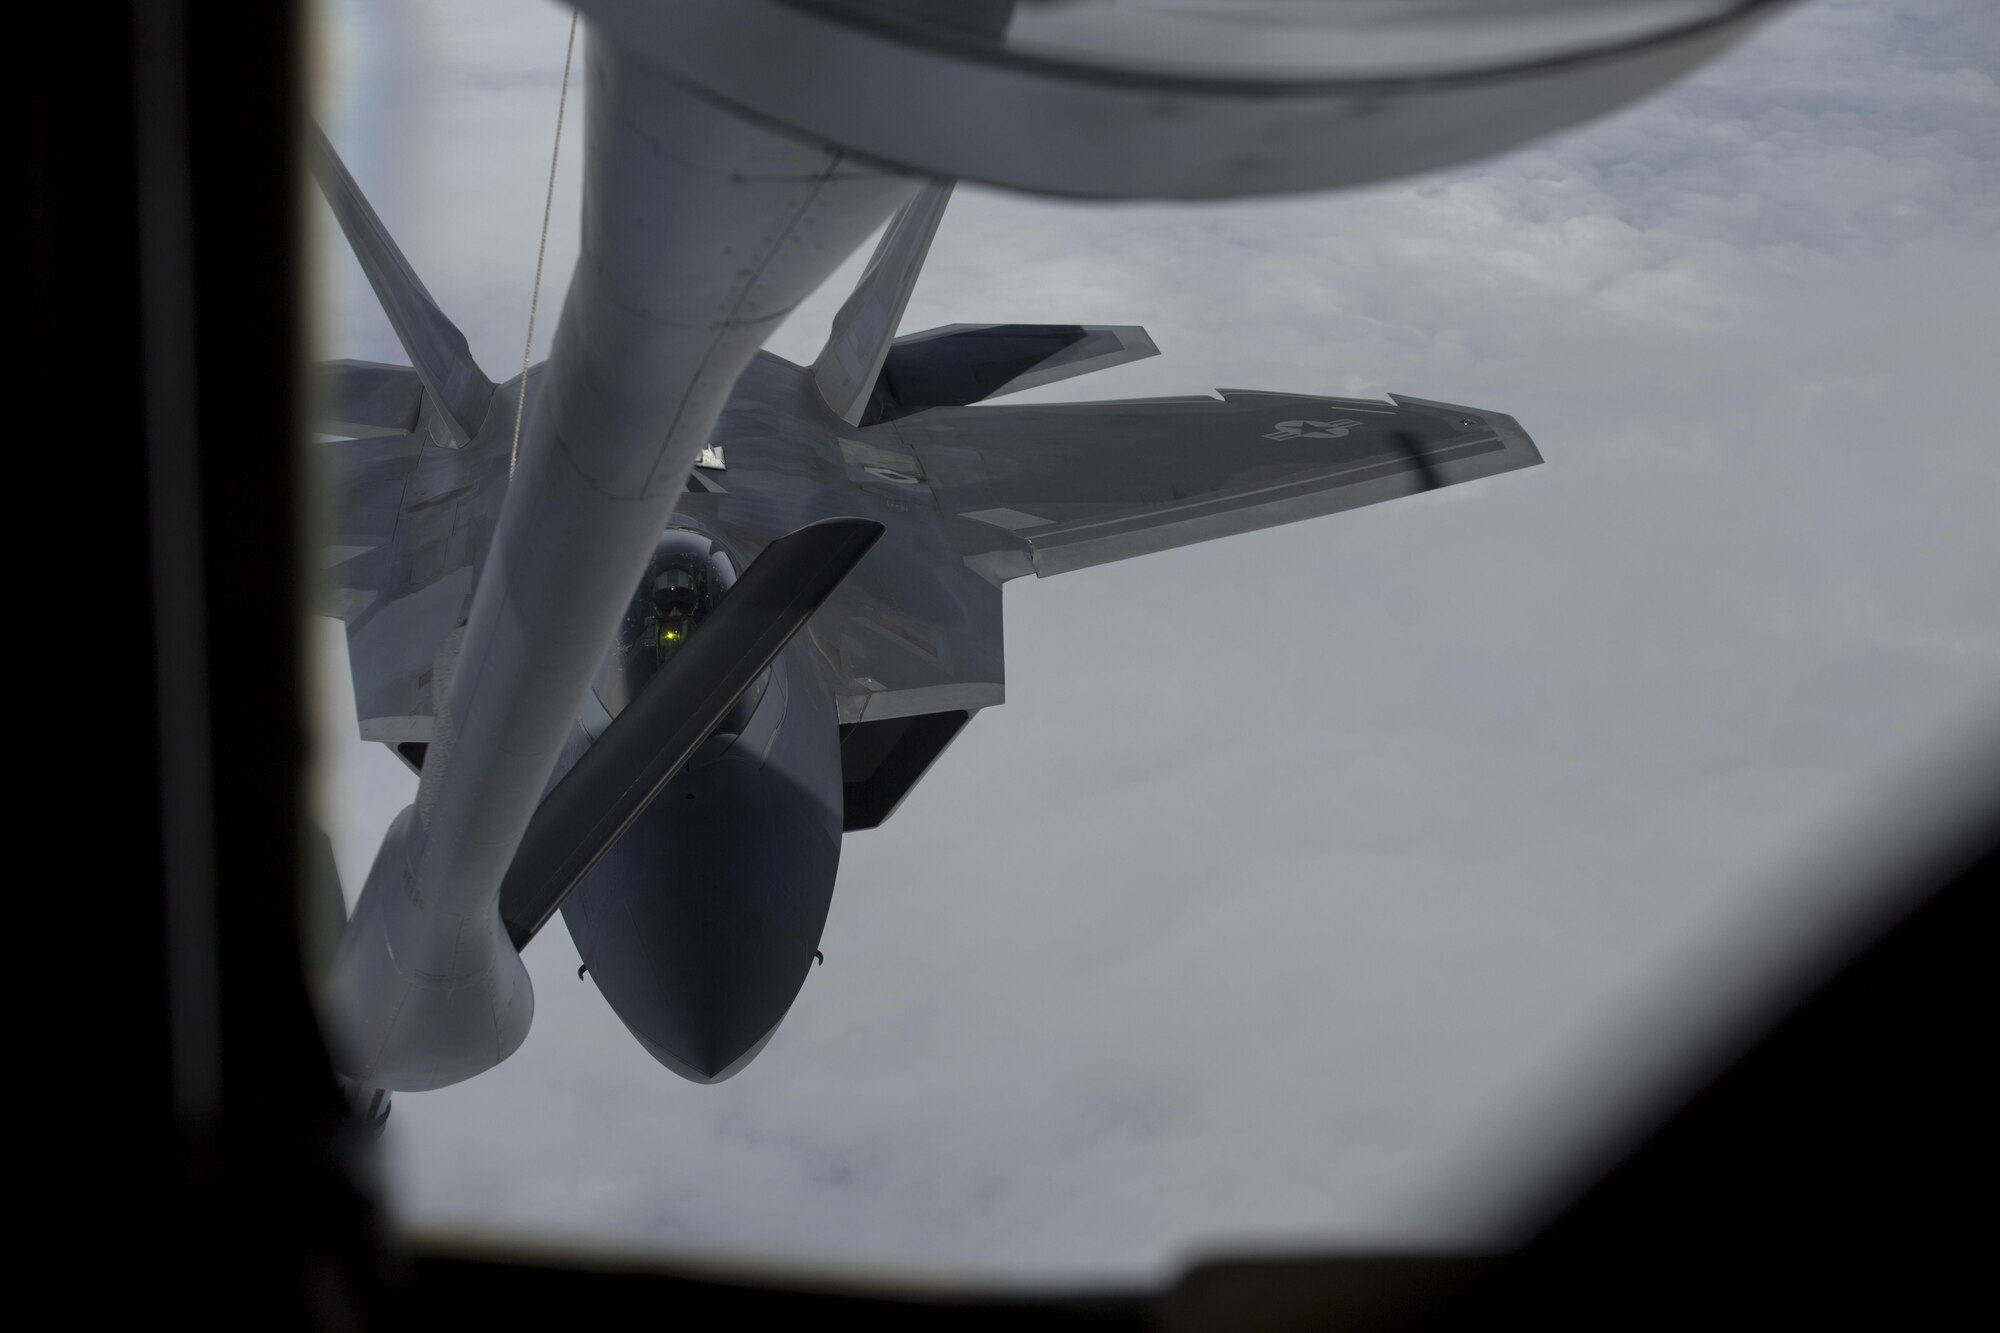 A U.S. Air Force F-22 Raptor prepares to refuel from a KC-135 Stratotanker from the 909th Air Refueling Squadron during Exercise Northern Edge, June 25, 2015. Northern Edge 2015 is Alaska’s premier joint training exercise designed to practice operations, tactics, techniques and procedures as well as enhance interoperability among the services. Thousands of Airmen, Soldiers, Sailors, Marines and Coast Guardsmen from active duty, Reserve and National Guard units, including tankers from the 18th Air Refueling Wing out of Kadena Air Force Base, Japan, are involved. (U.S. Marine Corps photo by Cpl. Thor J. Larson/Released)